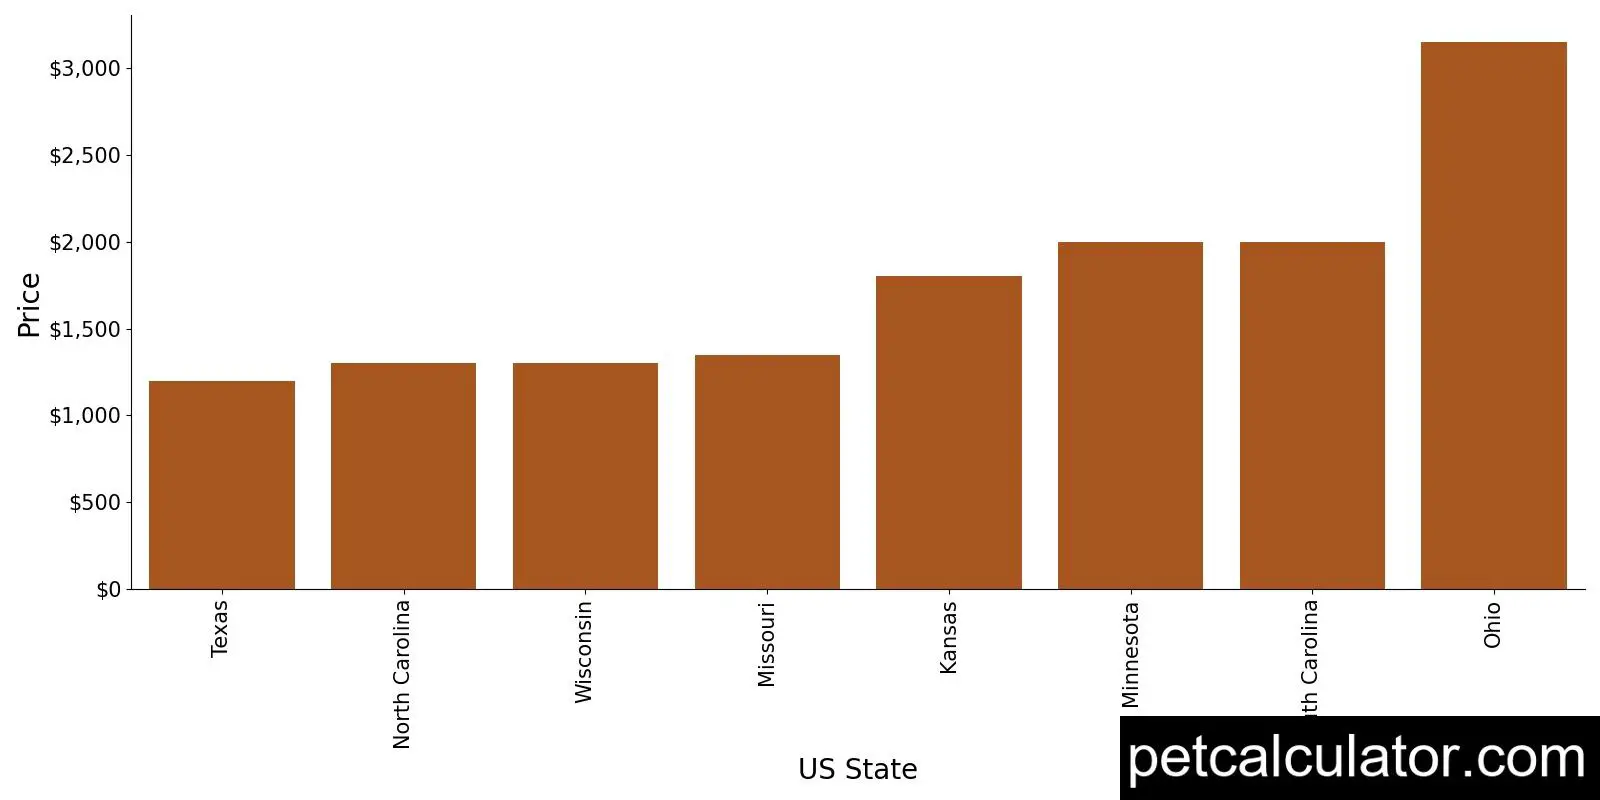 Price of Welsh Terrier by US State 